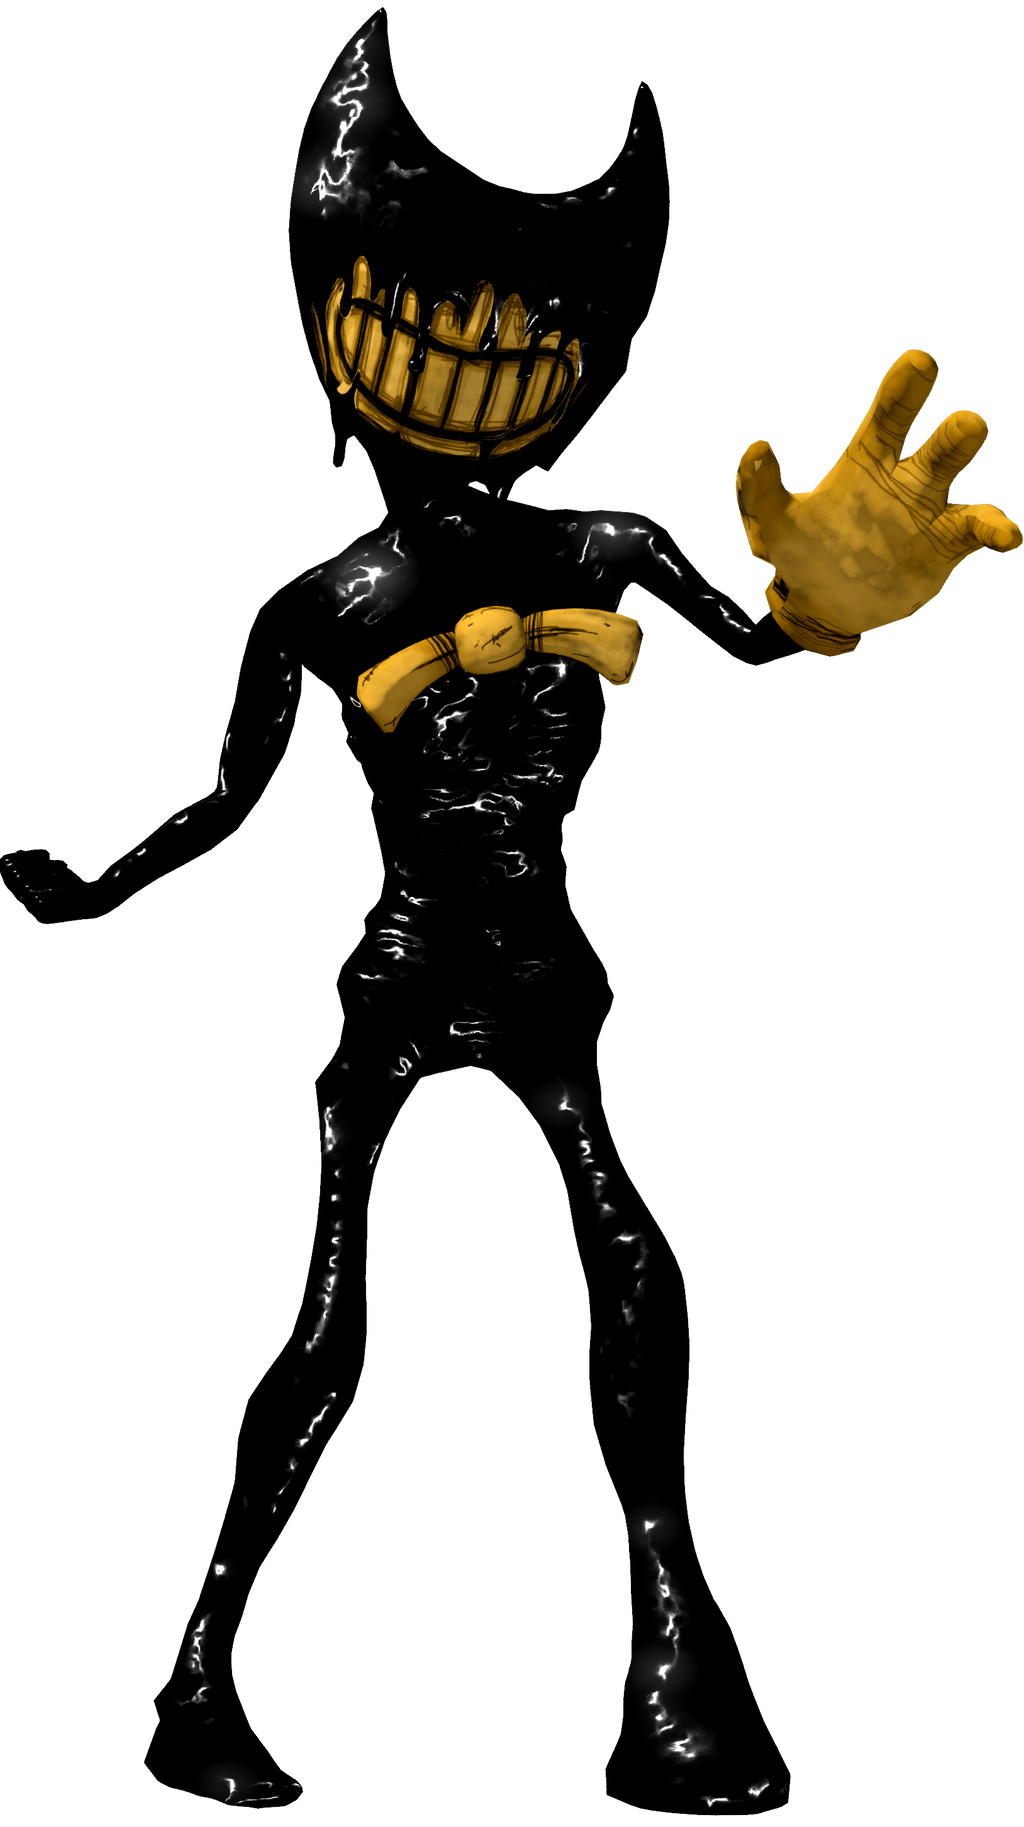 Bendy and The Ink Machine Chapter 4 Bendy Render by CynicSonic on ...